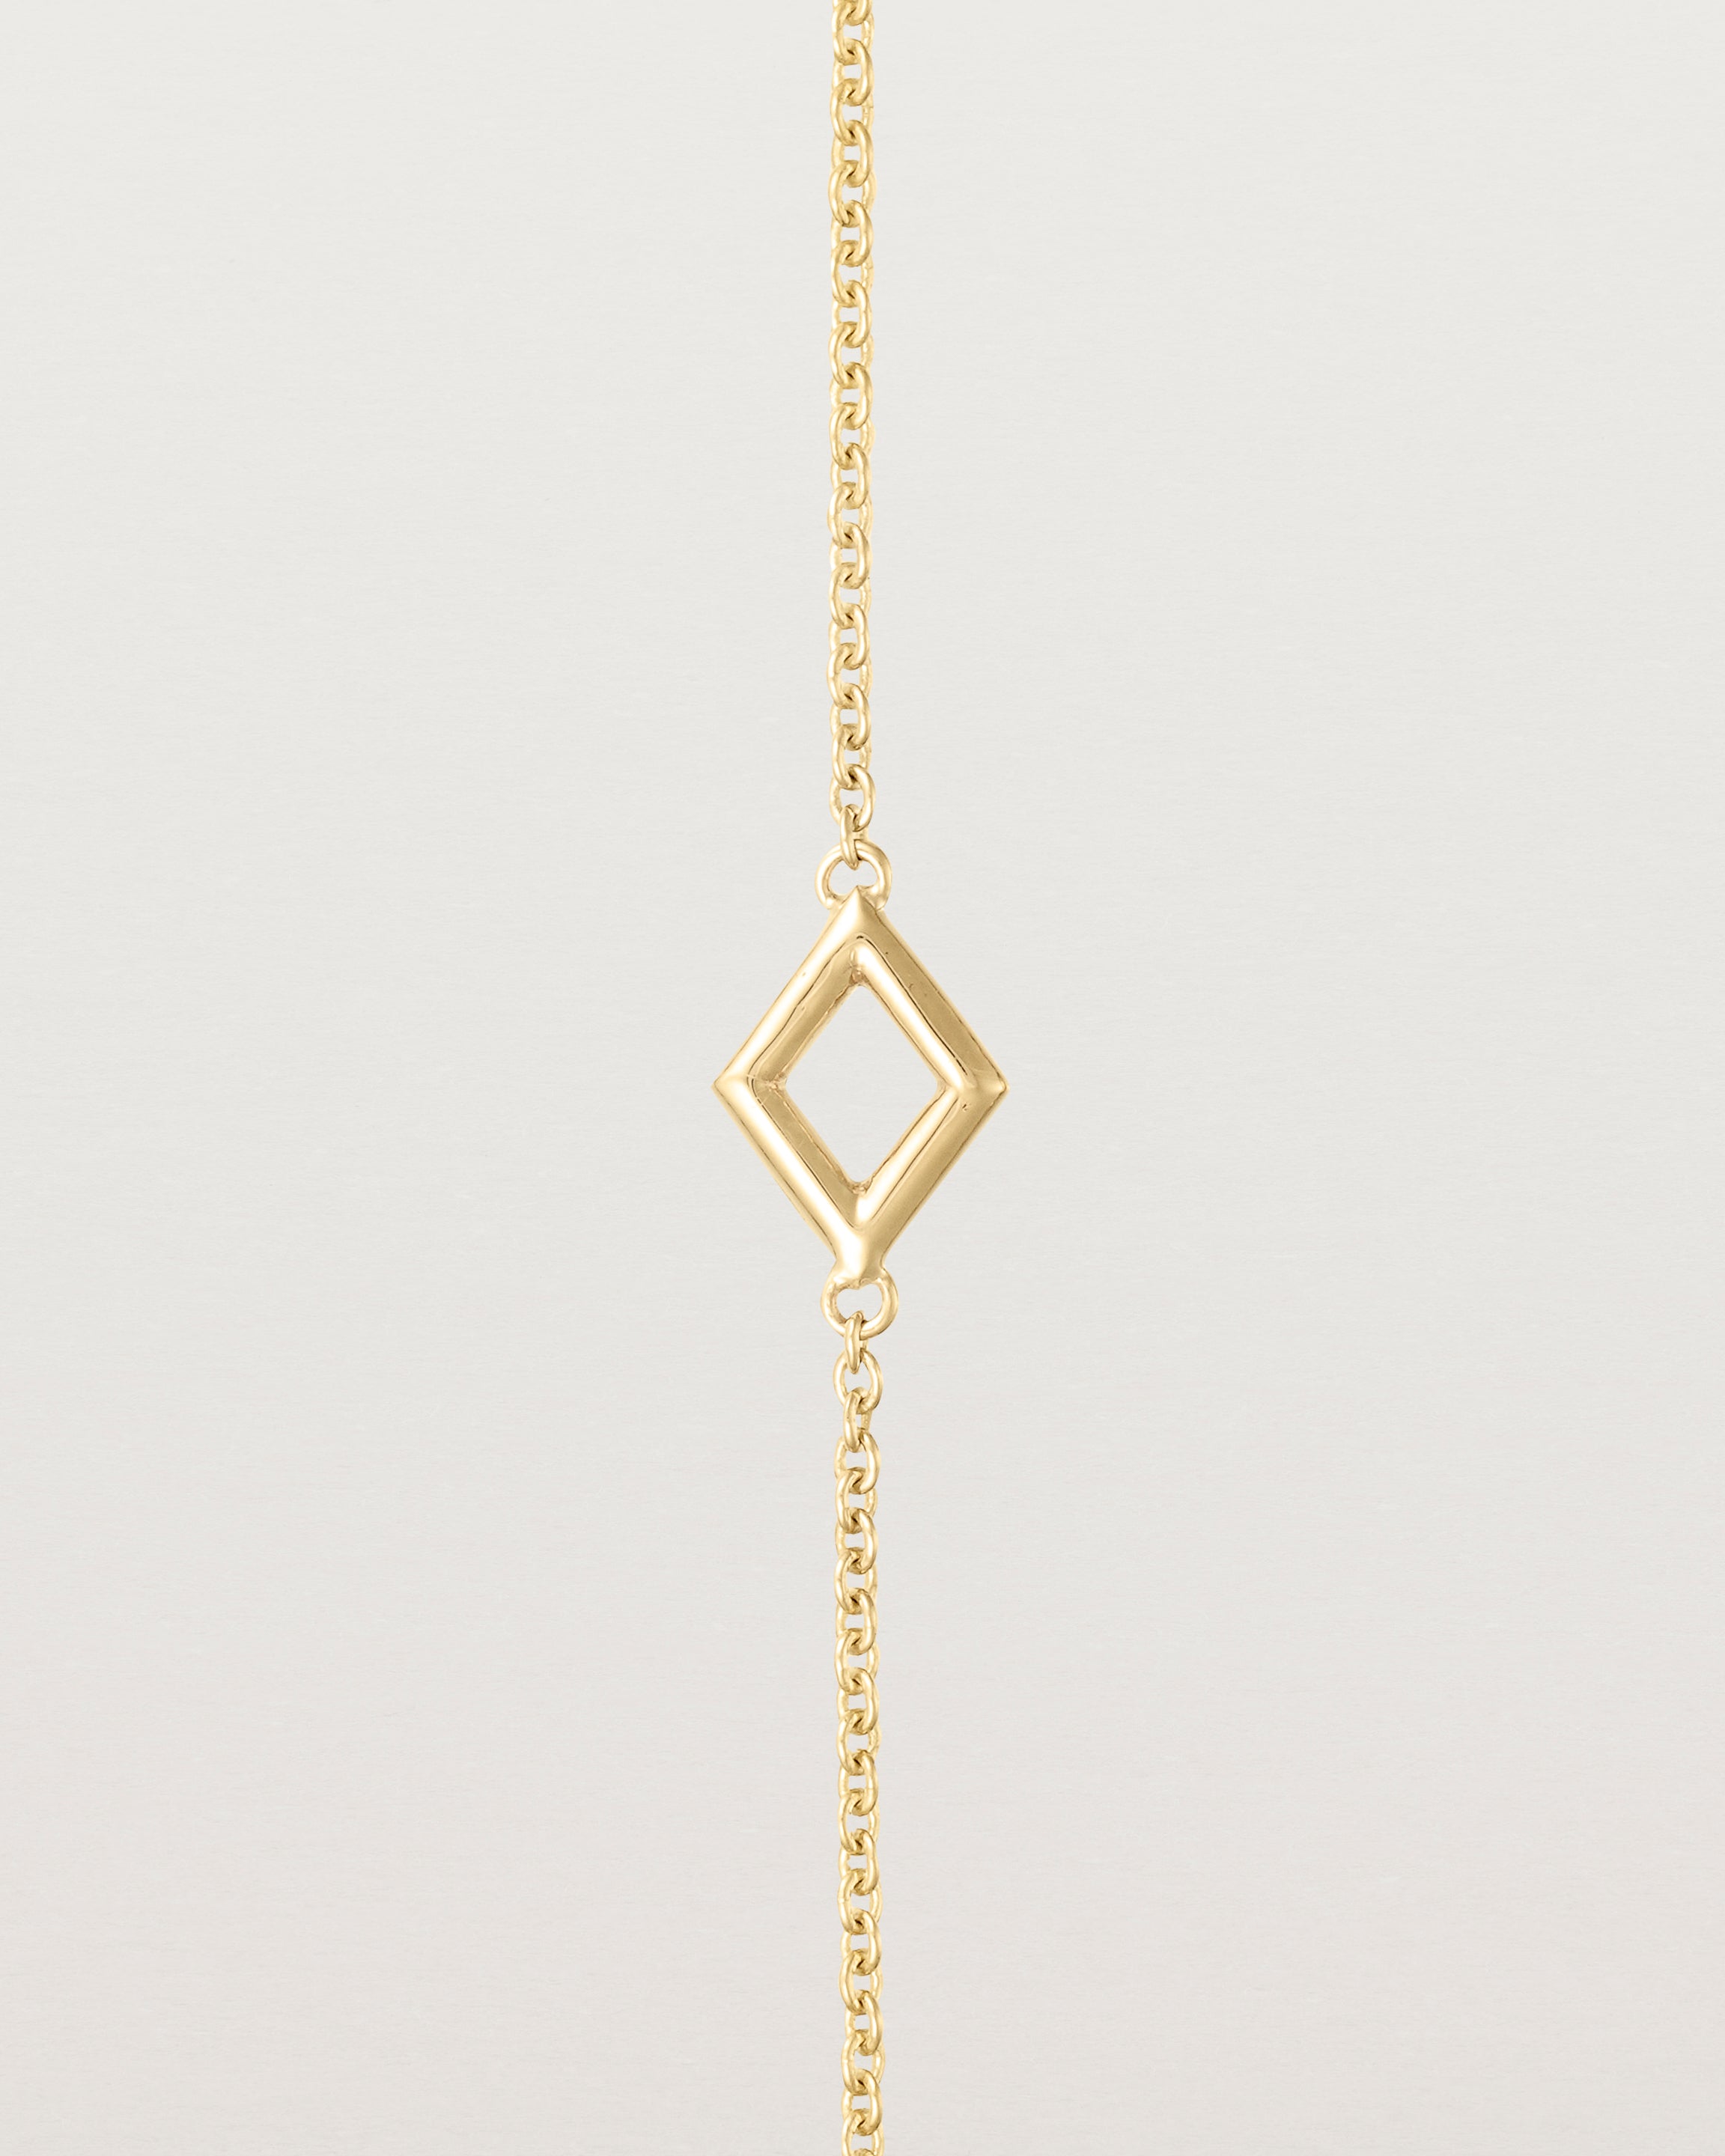 Close up of the Nuna Bracelet in yellow gold.